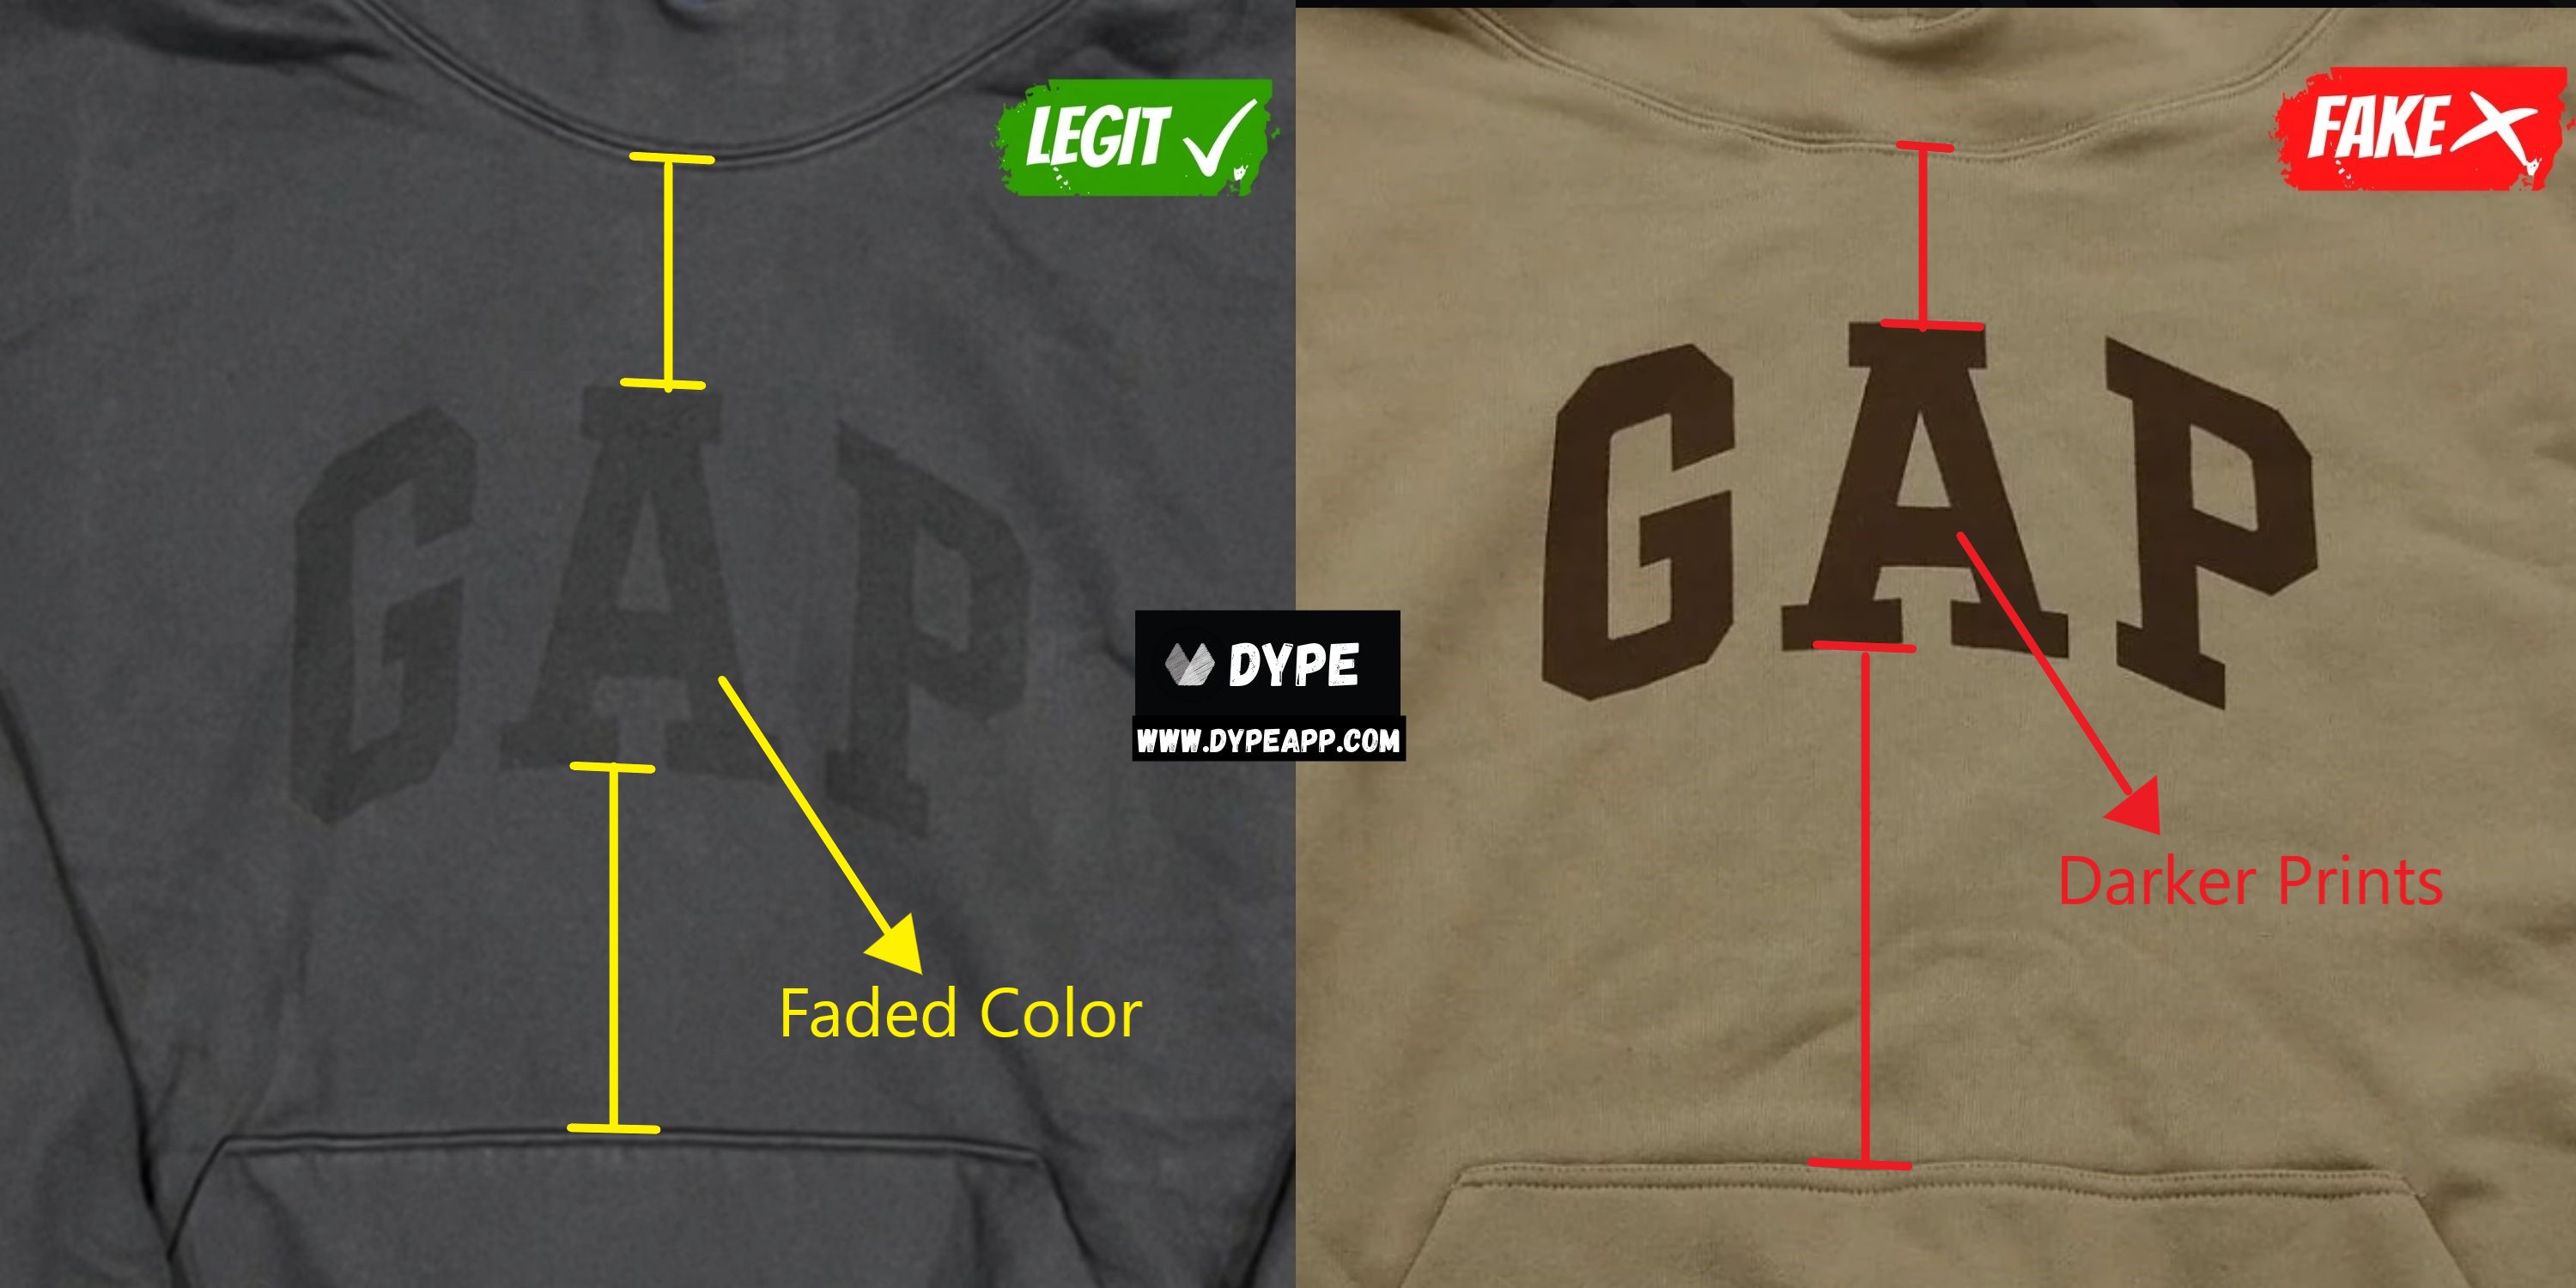 How to spot a fake Yeezy Gap Hoodie, Real vs Fake